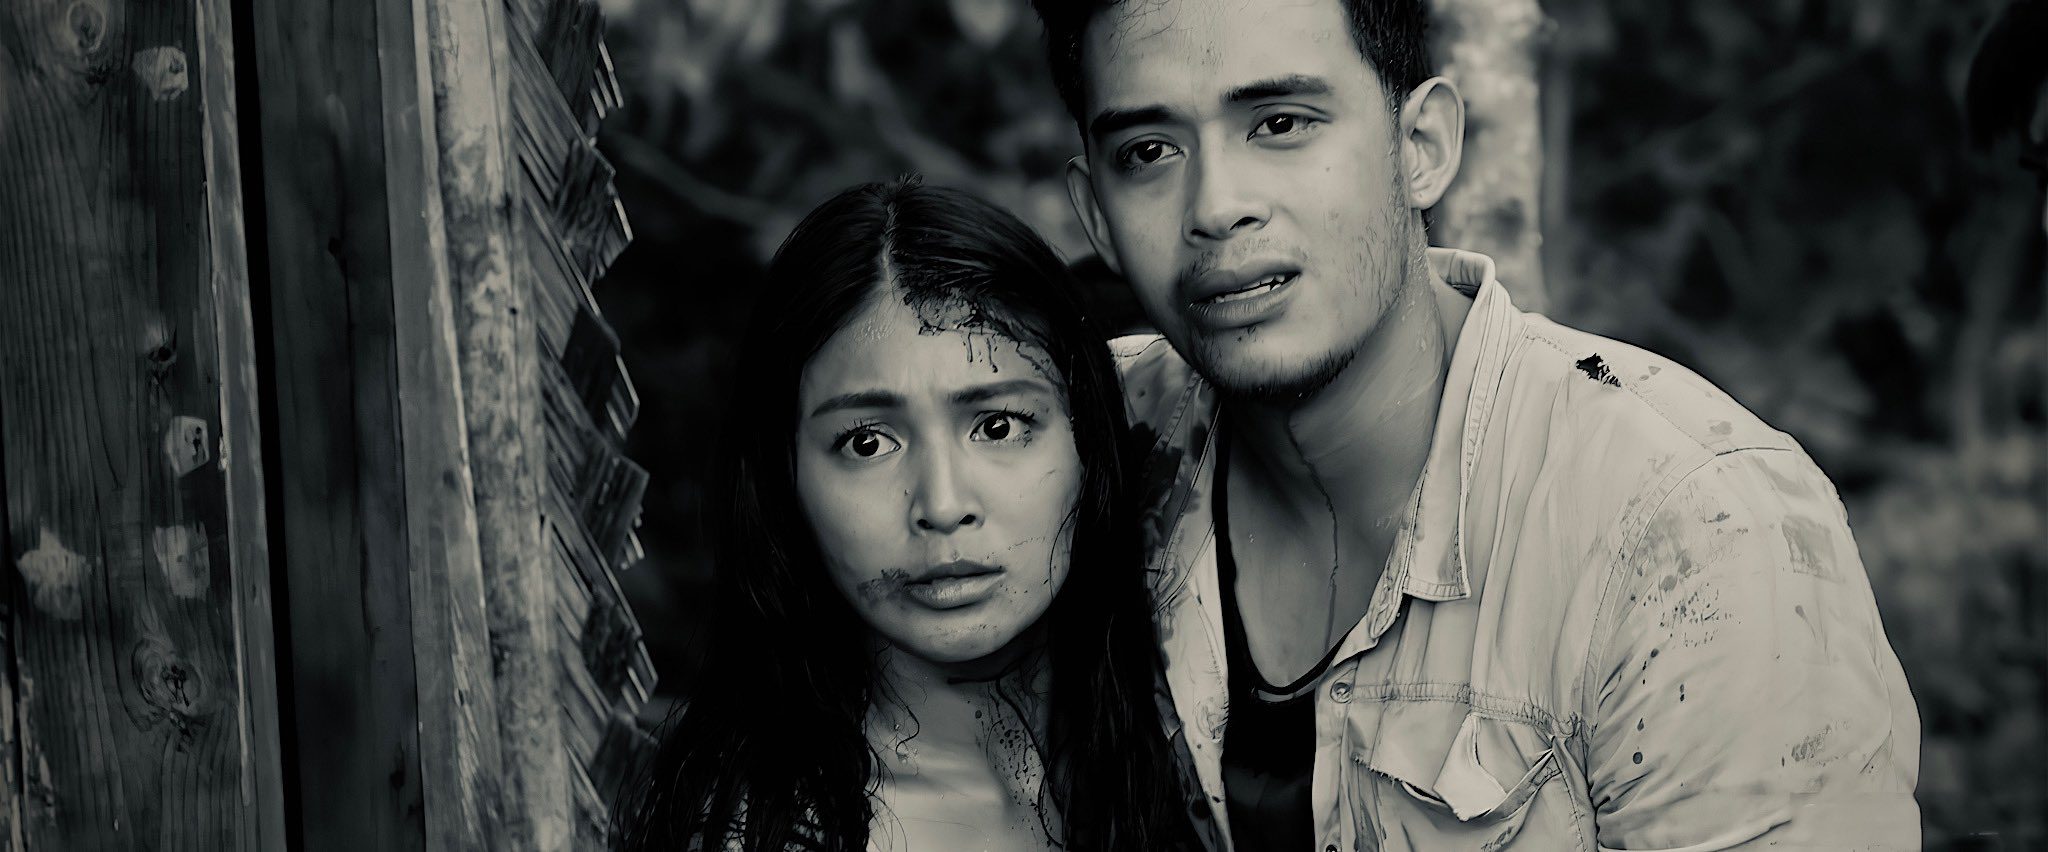 WATCH: Eerie ‘Greed’ trailer teases dark fate of Nadine Lustre and Diego Loyzaga